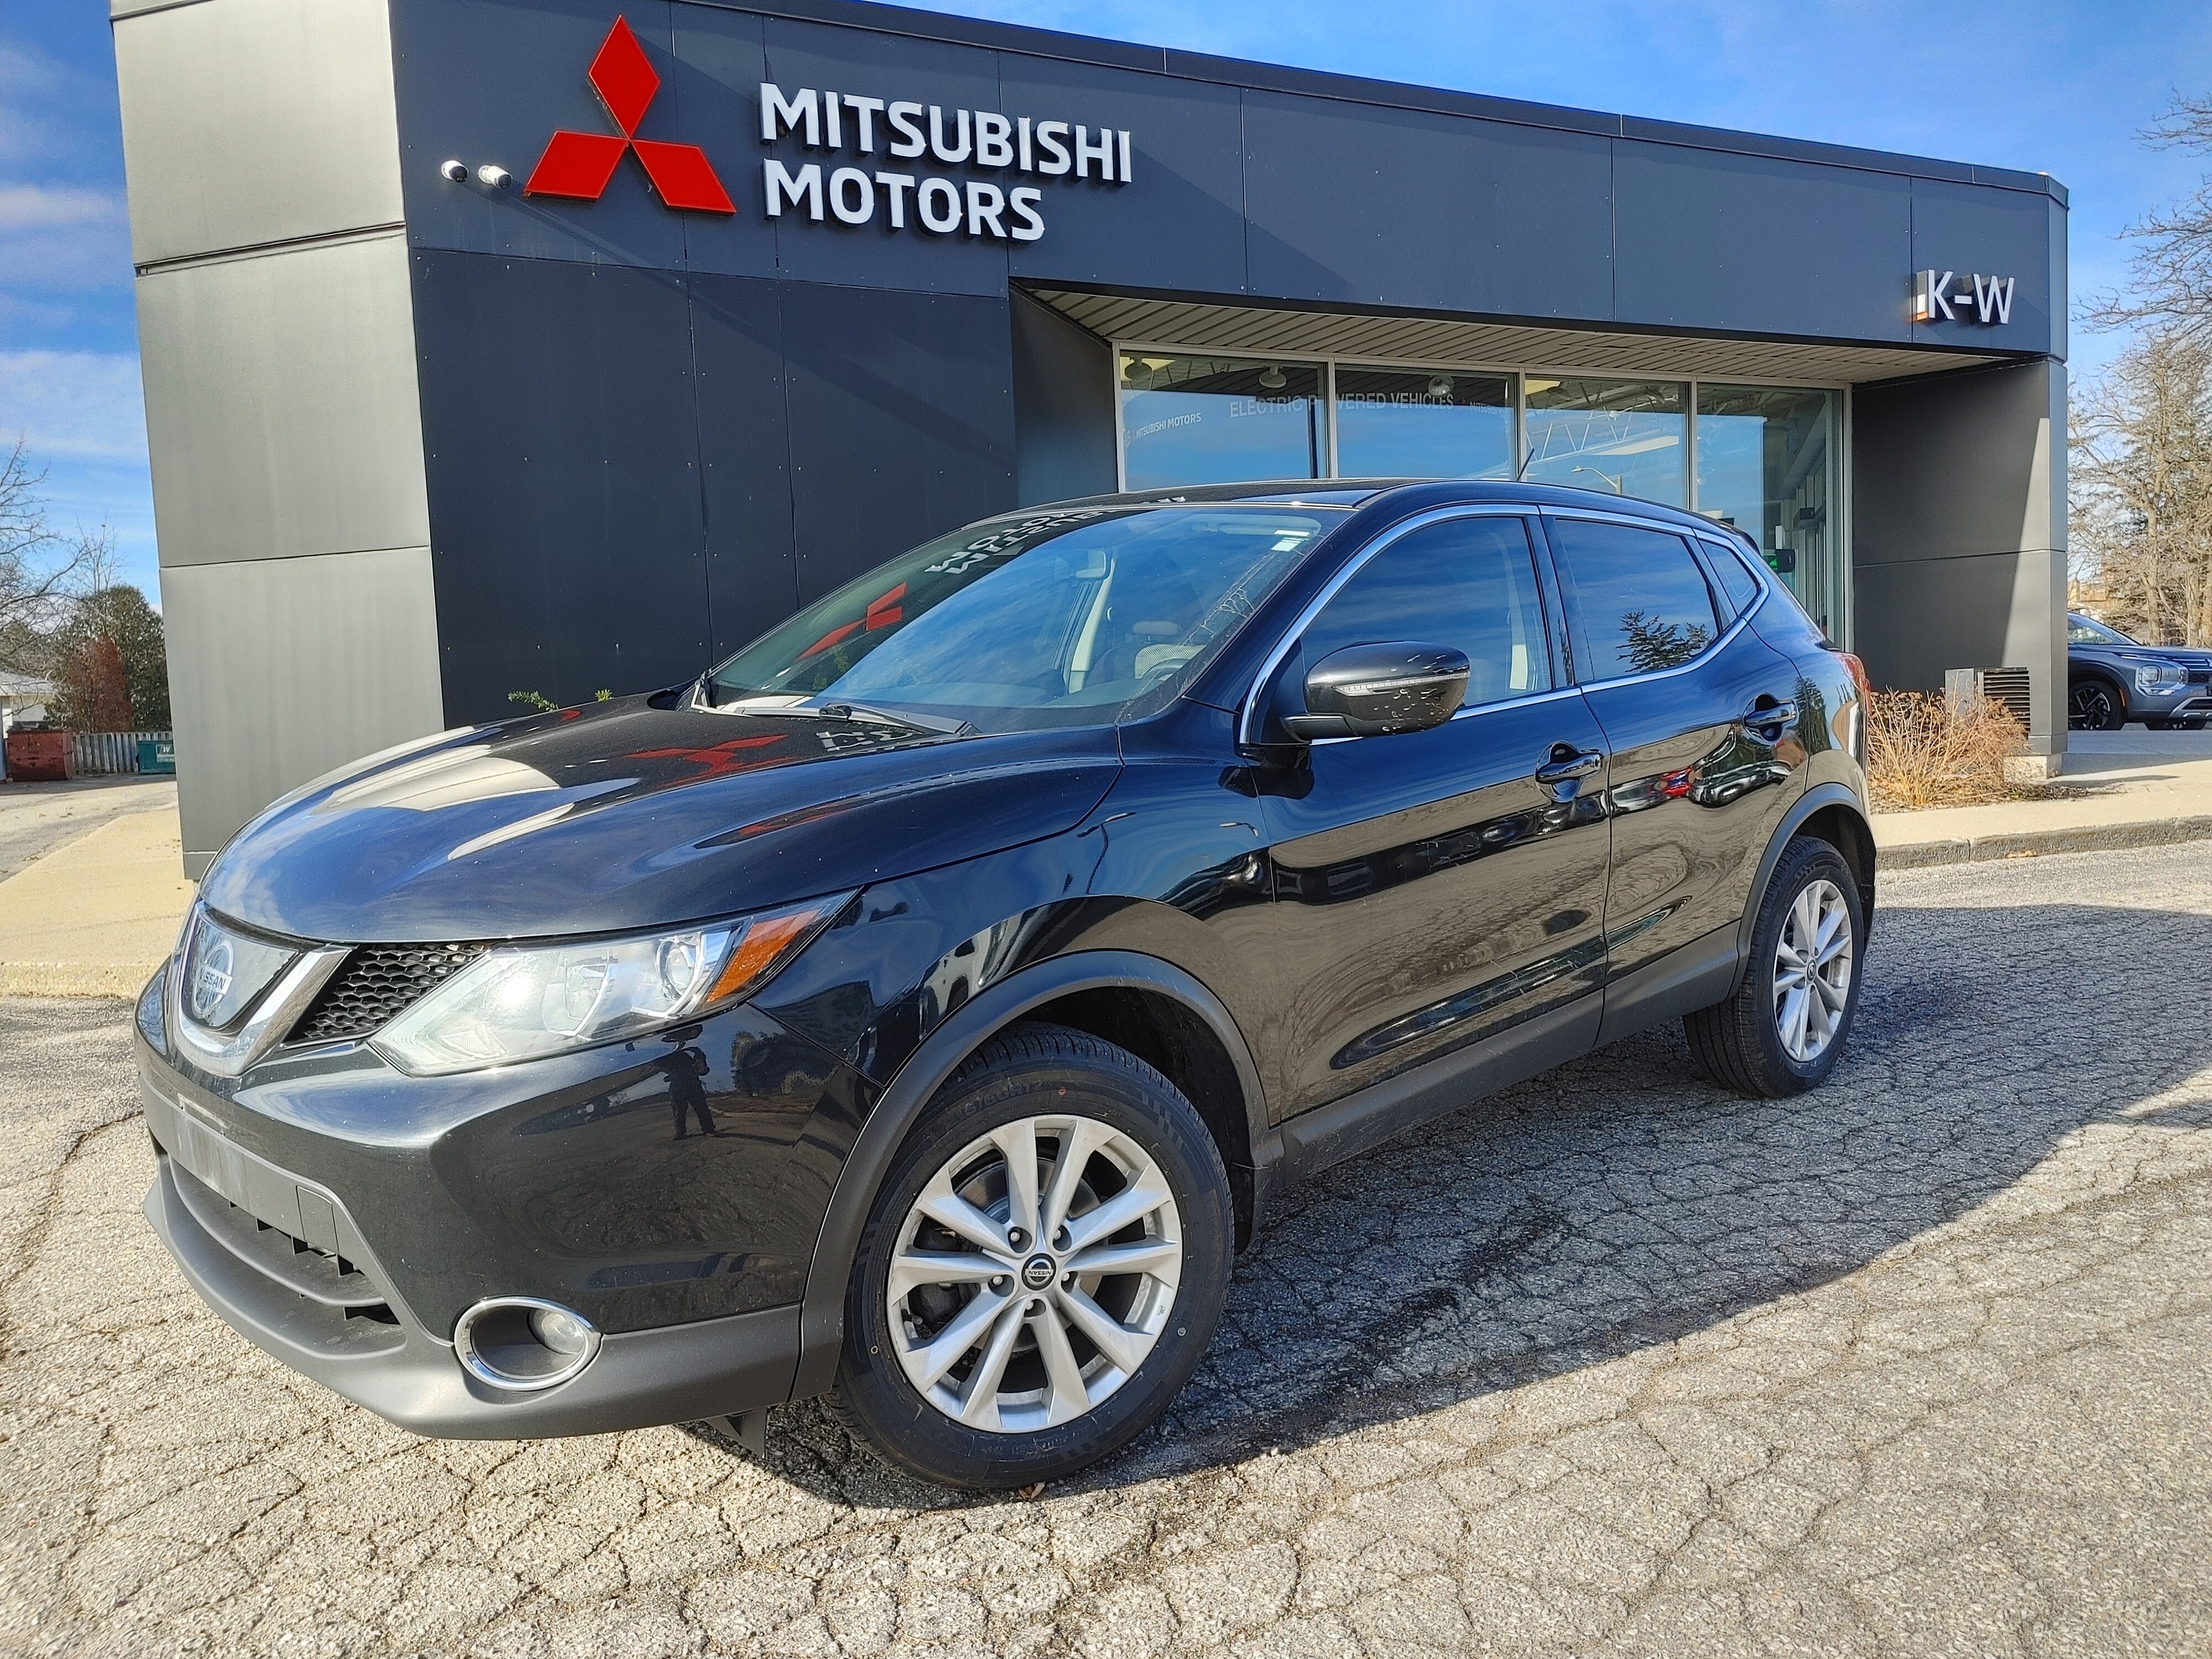 2019 Nissan Qashqai SV AWD, snow tires included, Remote start